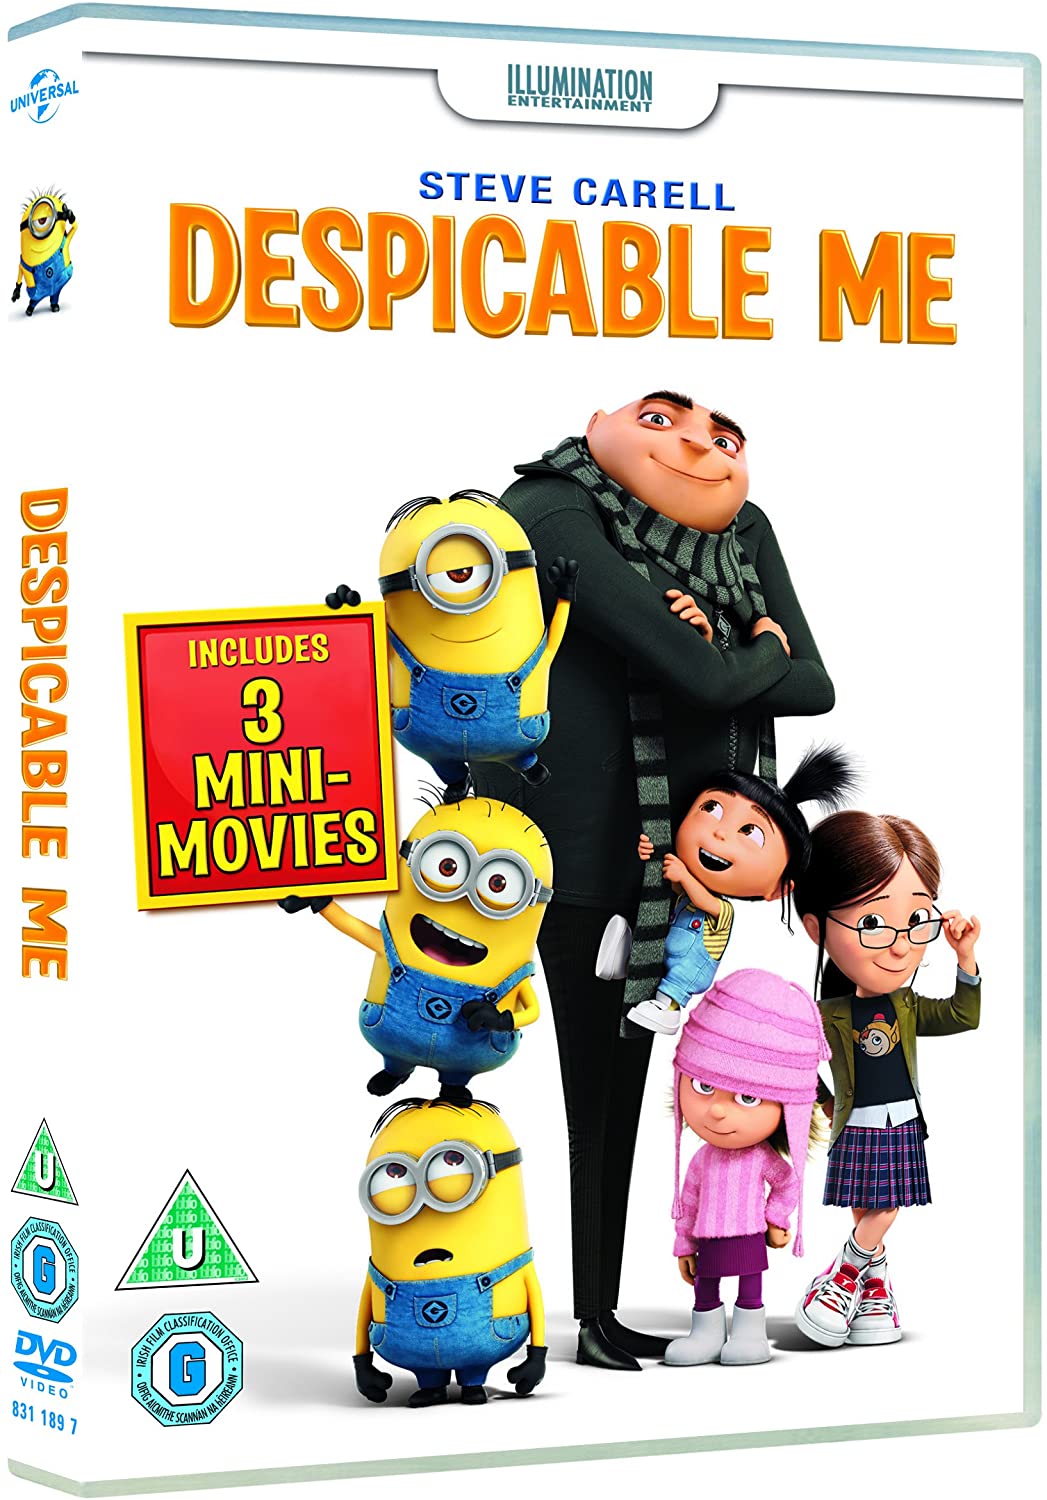 Despicable Me (2017 resleeve) - Family/Comedy [DVD]